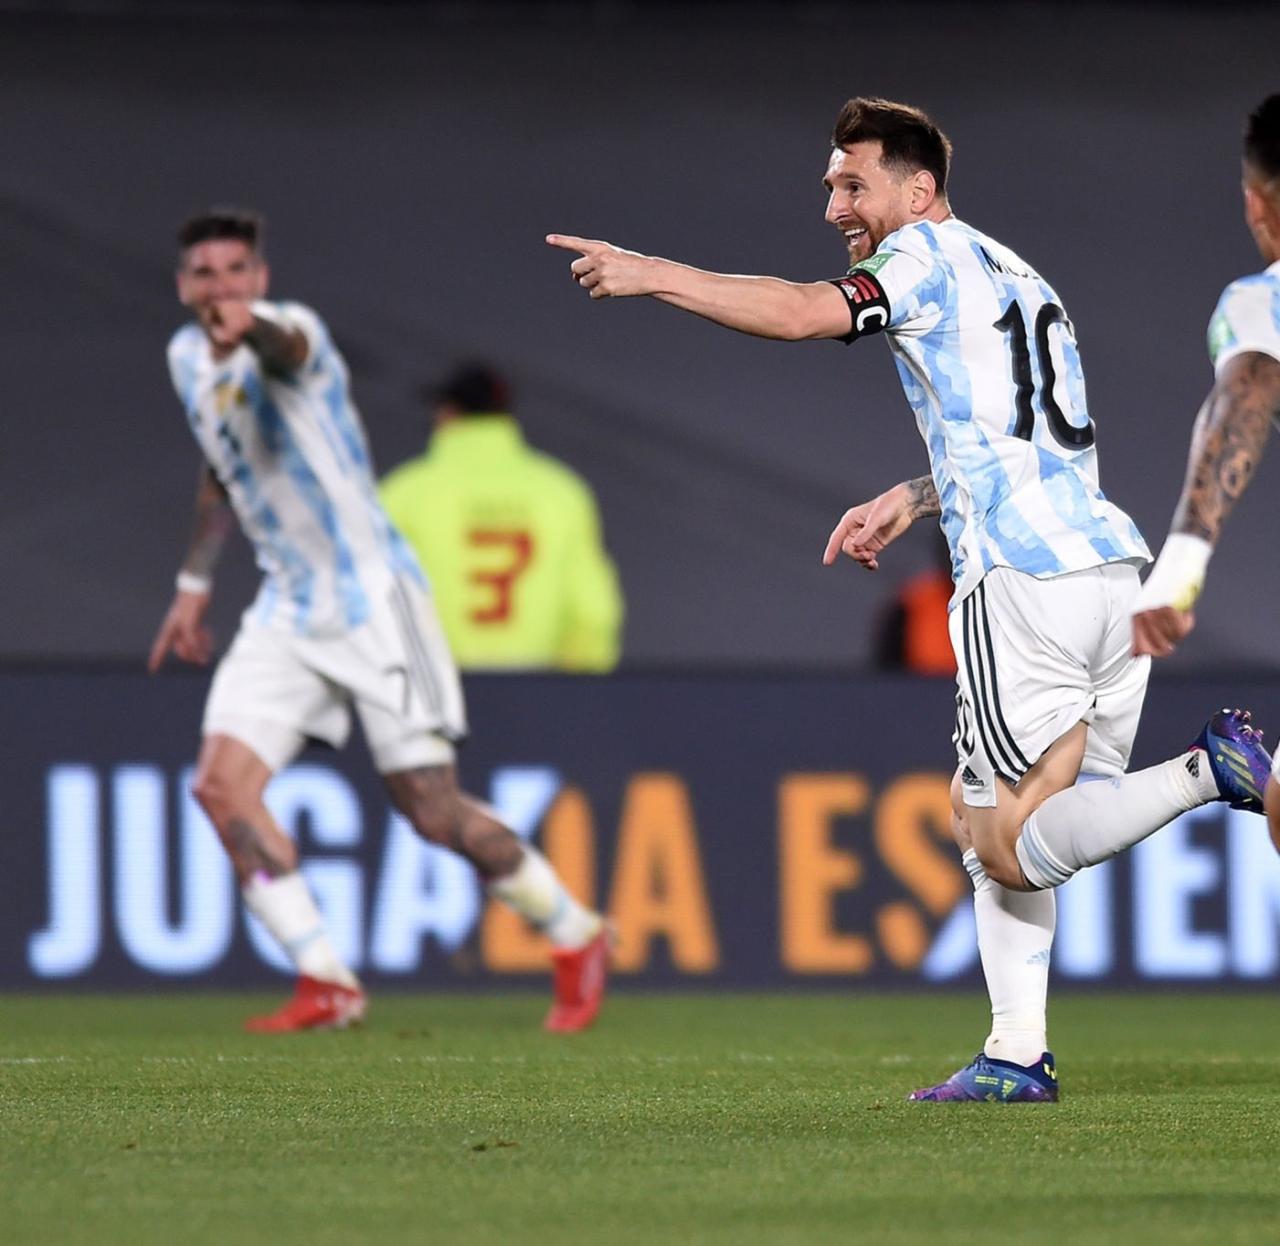 𝐀𝐅𝐂 𝐀𝐉𝐀𝐗 on X: "Lionel Messi has produced 9 goals & 5 assists for Argentina since June 2021. 14 G/A in 13 games.. https://t.co/ayQPlUUNgQ" / X